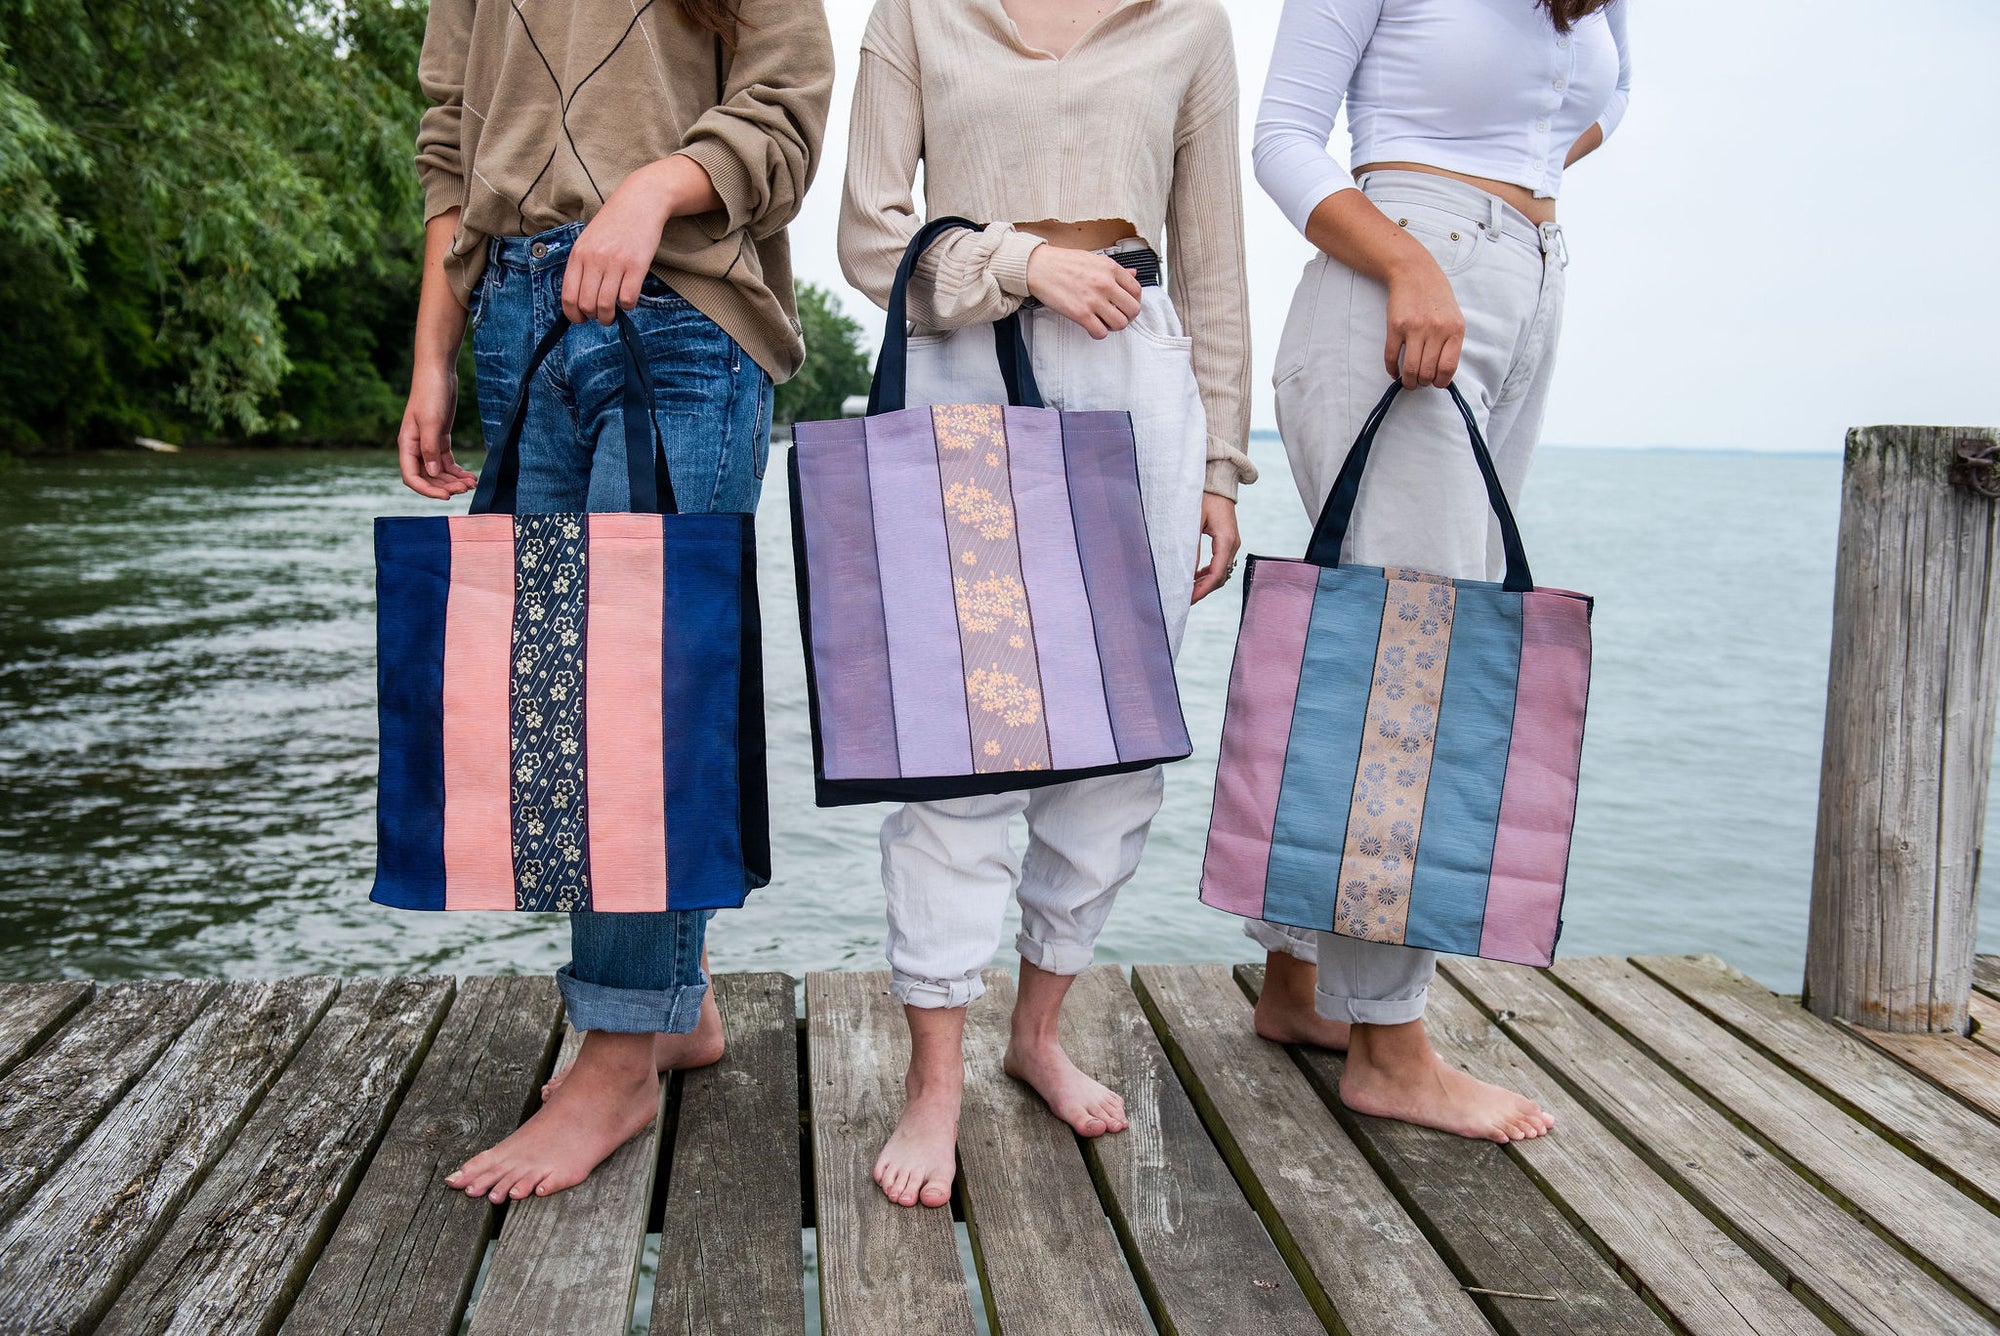 Large Tote Bags with Japanese Vibes, Japanese Aesthetics, Pastels, Bright Colors, Purple, Pink, Blue Tote Bags, Beach Tote Bag, Farmers Market Bag, Lightweight, Durable, Water Resistant Tote Bags, Finger Lakes Region Gift Ideas,  Stylish ShimaShima Bags